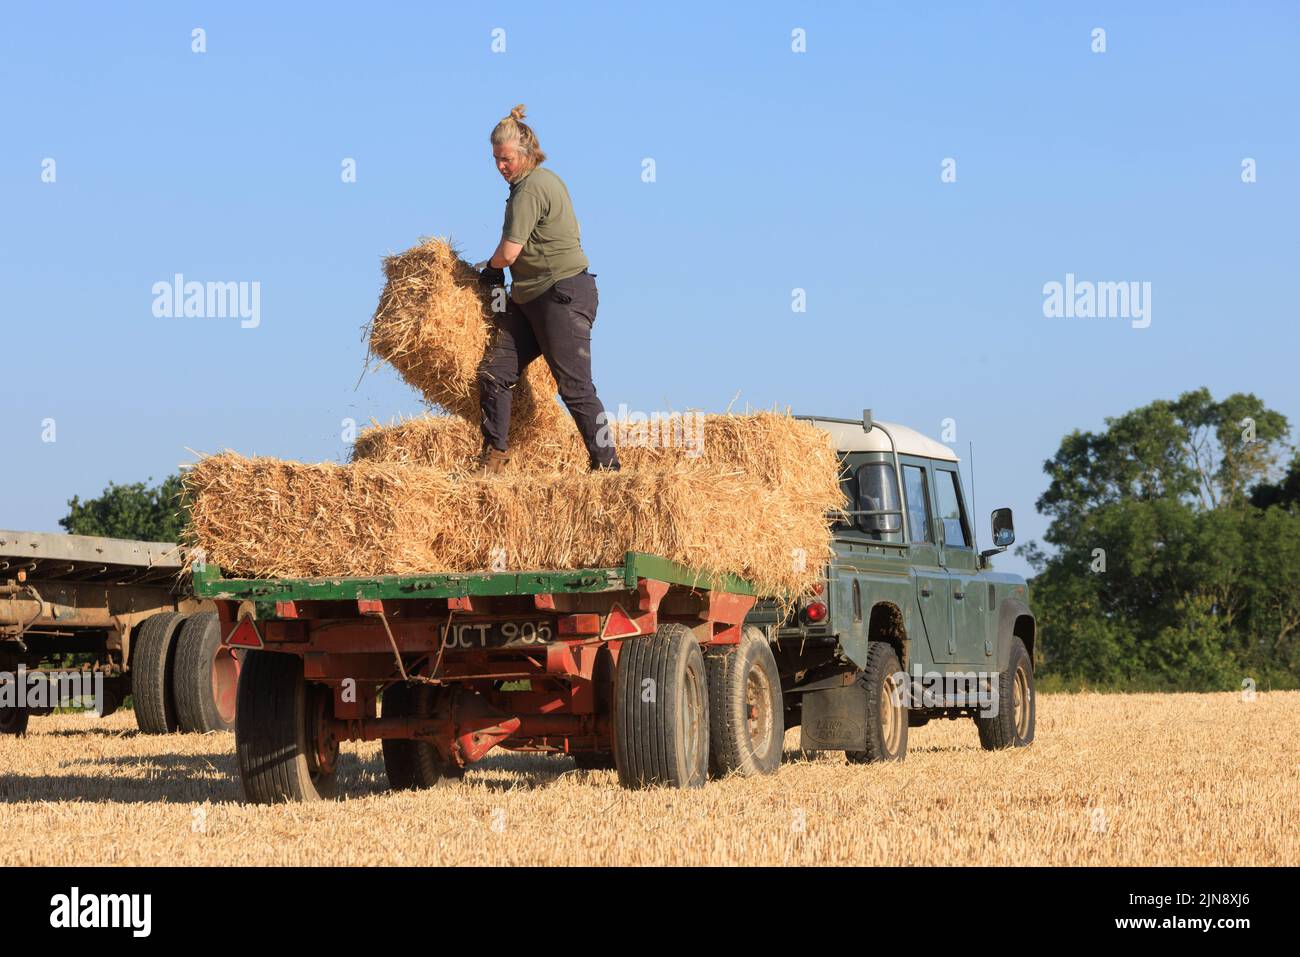 Uffington, Lincolnshire, UK. 10th August 2022 :- Uffington, Lincolnshire. A farmer collects straw bales in the cool of the morning as the Met Office issue another hight temperature warning. The bales will be used to feed their livestock in the Winter months Credit: Tim Scrivener/Alamy Live News Stock Photo